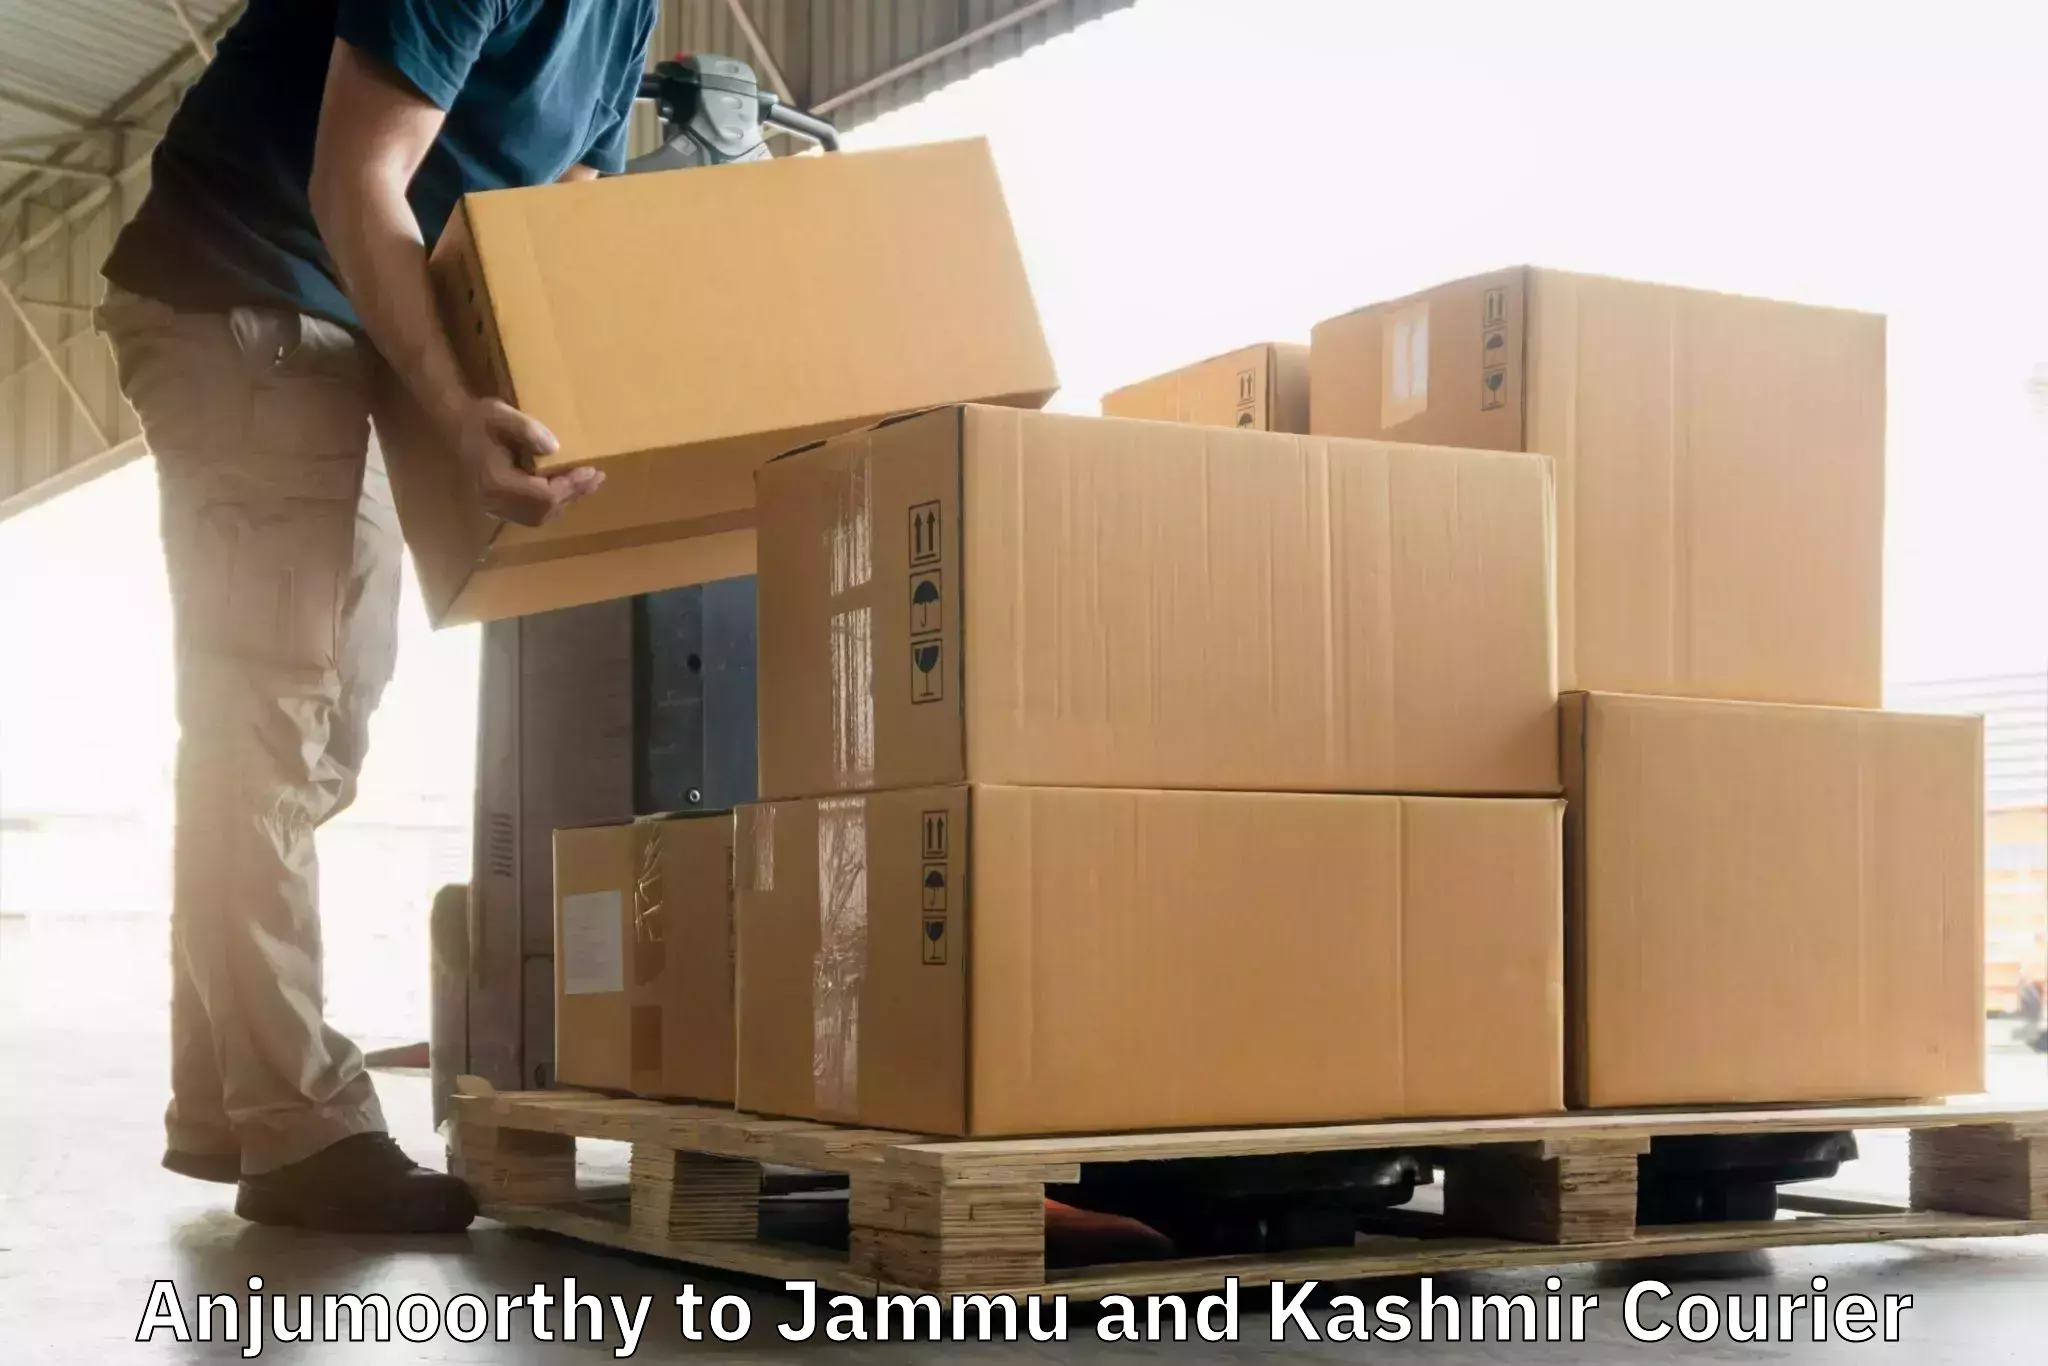 Customer-friendly courier services in Anjumoorthy to Baramulla